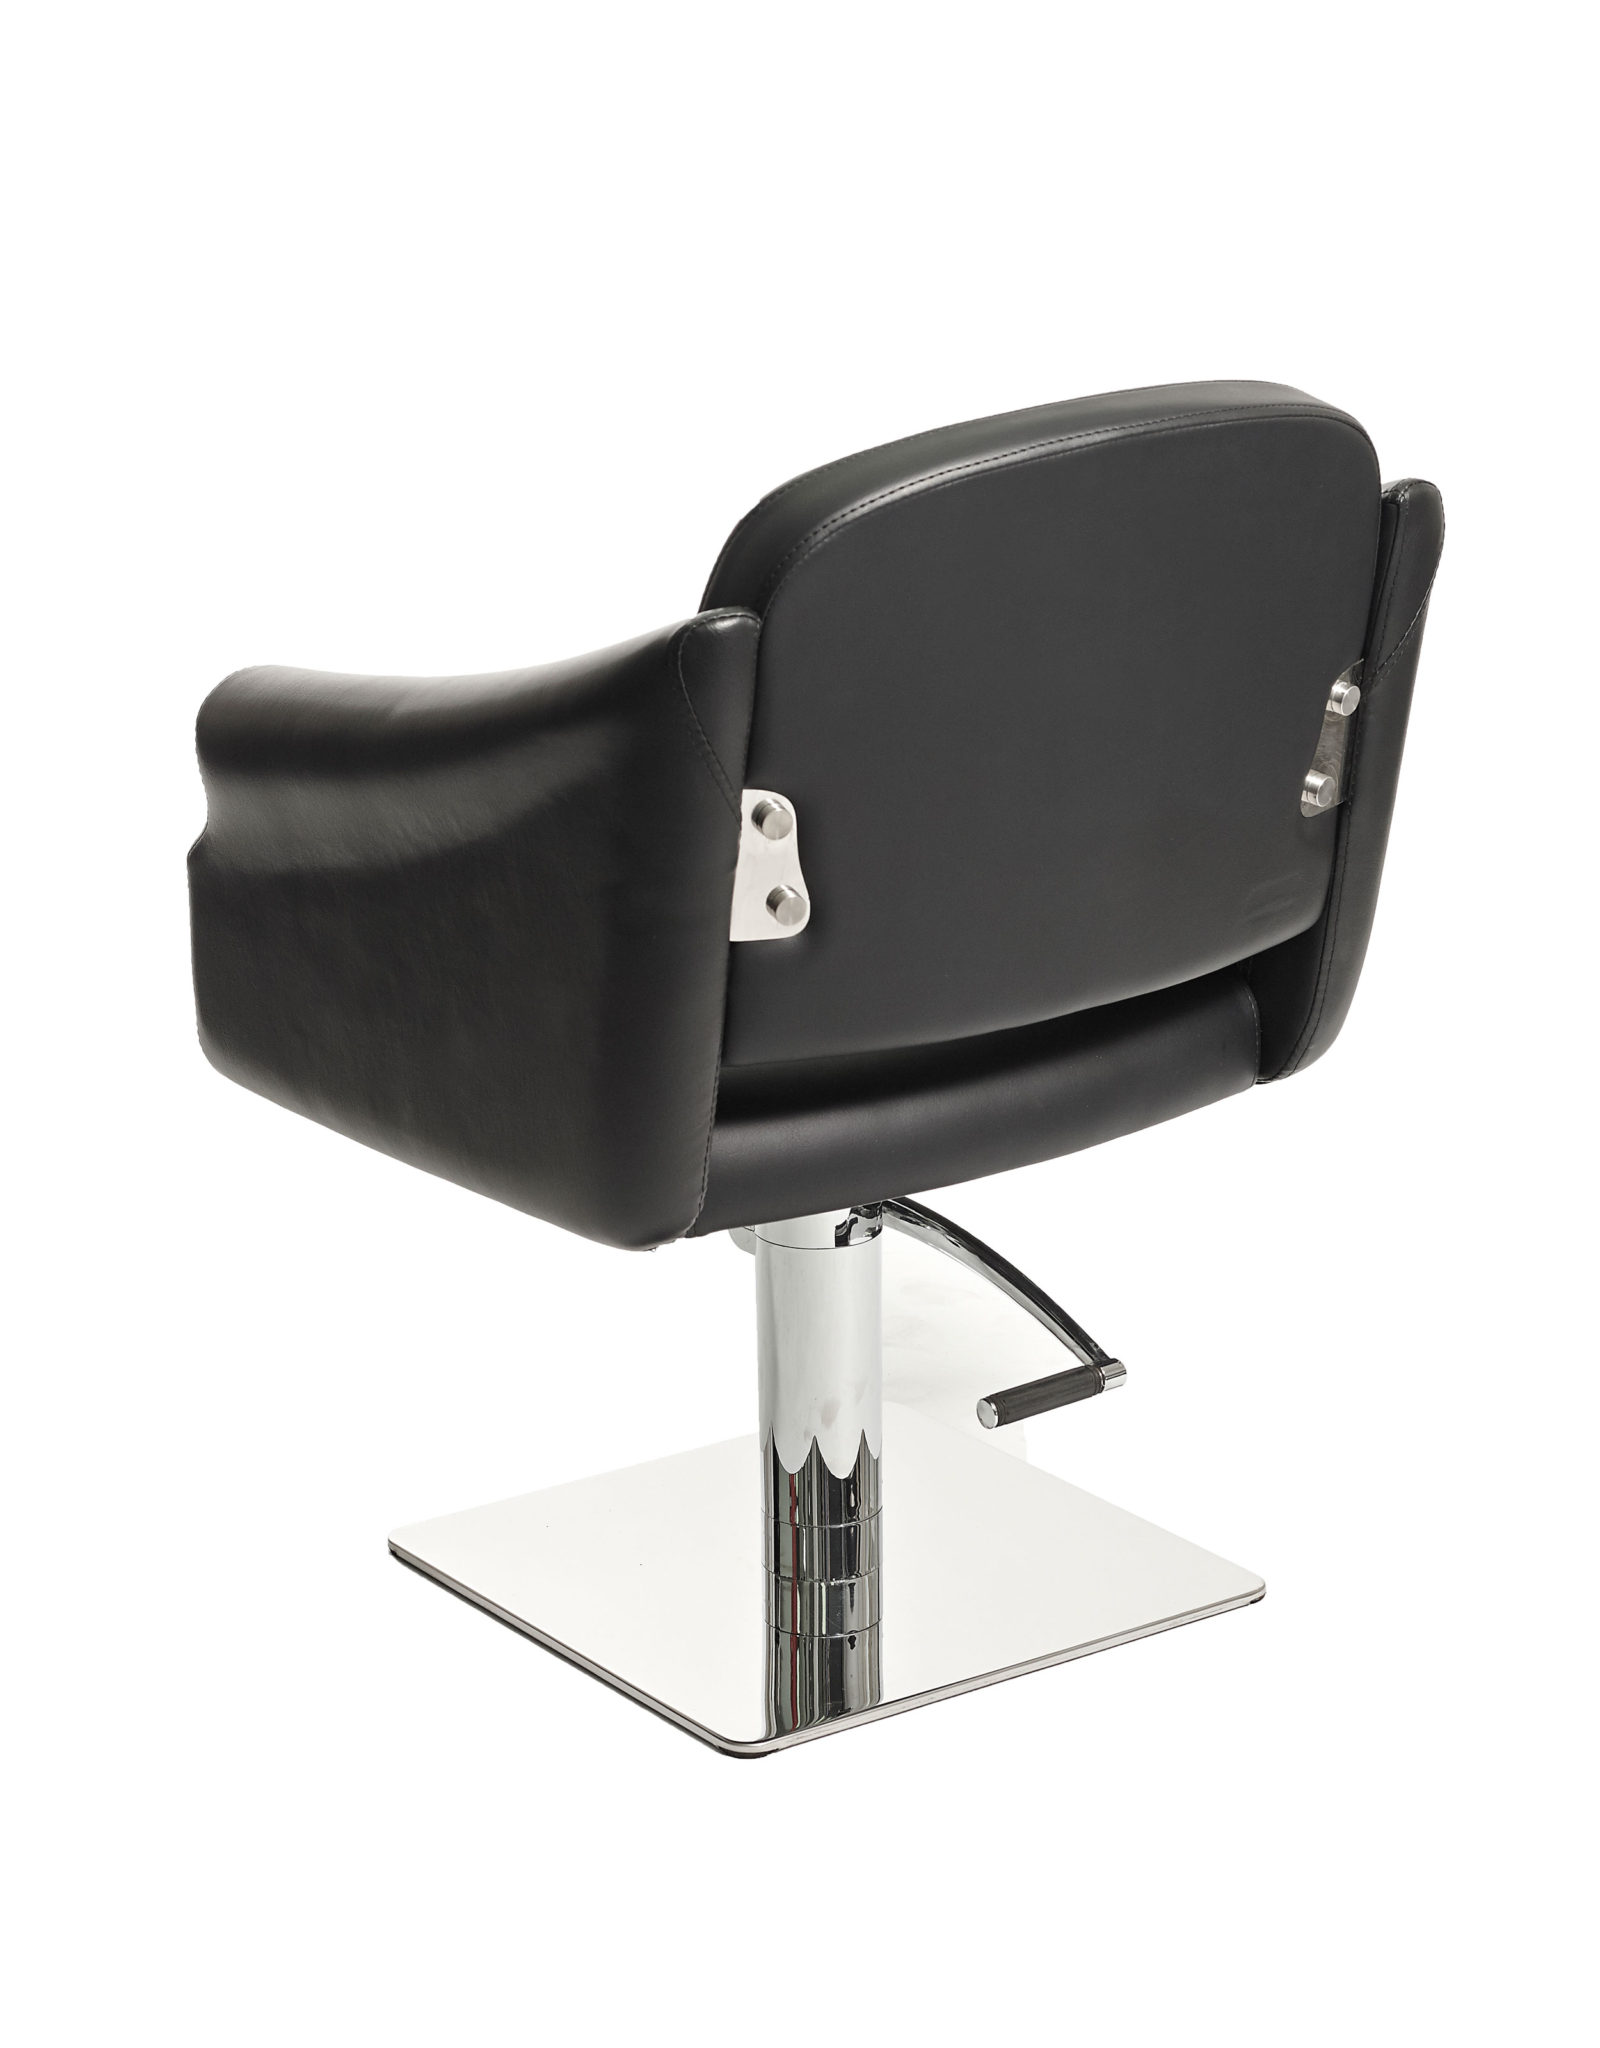 Black Eclipse Salon Styling Chair by SEC